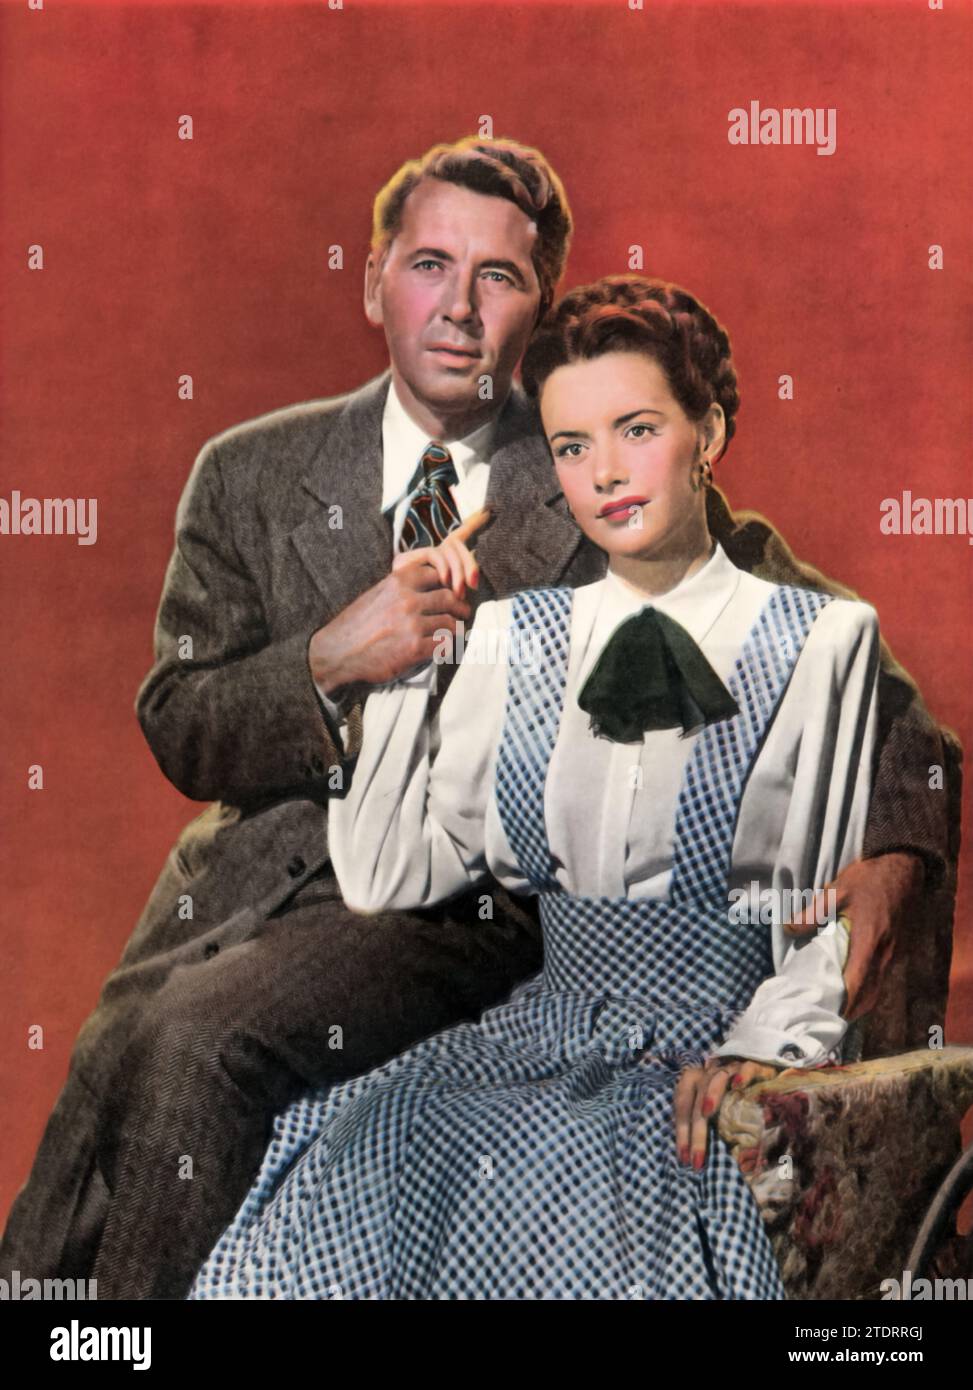 Susan Peters, pictured in a wheelchair beside co-star Alexander Knox on the set of 'Sign of the Ram' (1948), following her severe hunting accident. The film centers around Leah St. Aubyn, played by Peters, a wheelchair-bound matriarch who uses cunning and manipulation to dominate her family, leading to unexpected and dramatic consequences. Peters' portrayal, informed by her personal challenges, adds a gripping and authentic dimension to this family drama. Stock Photo